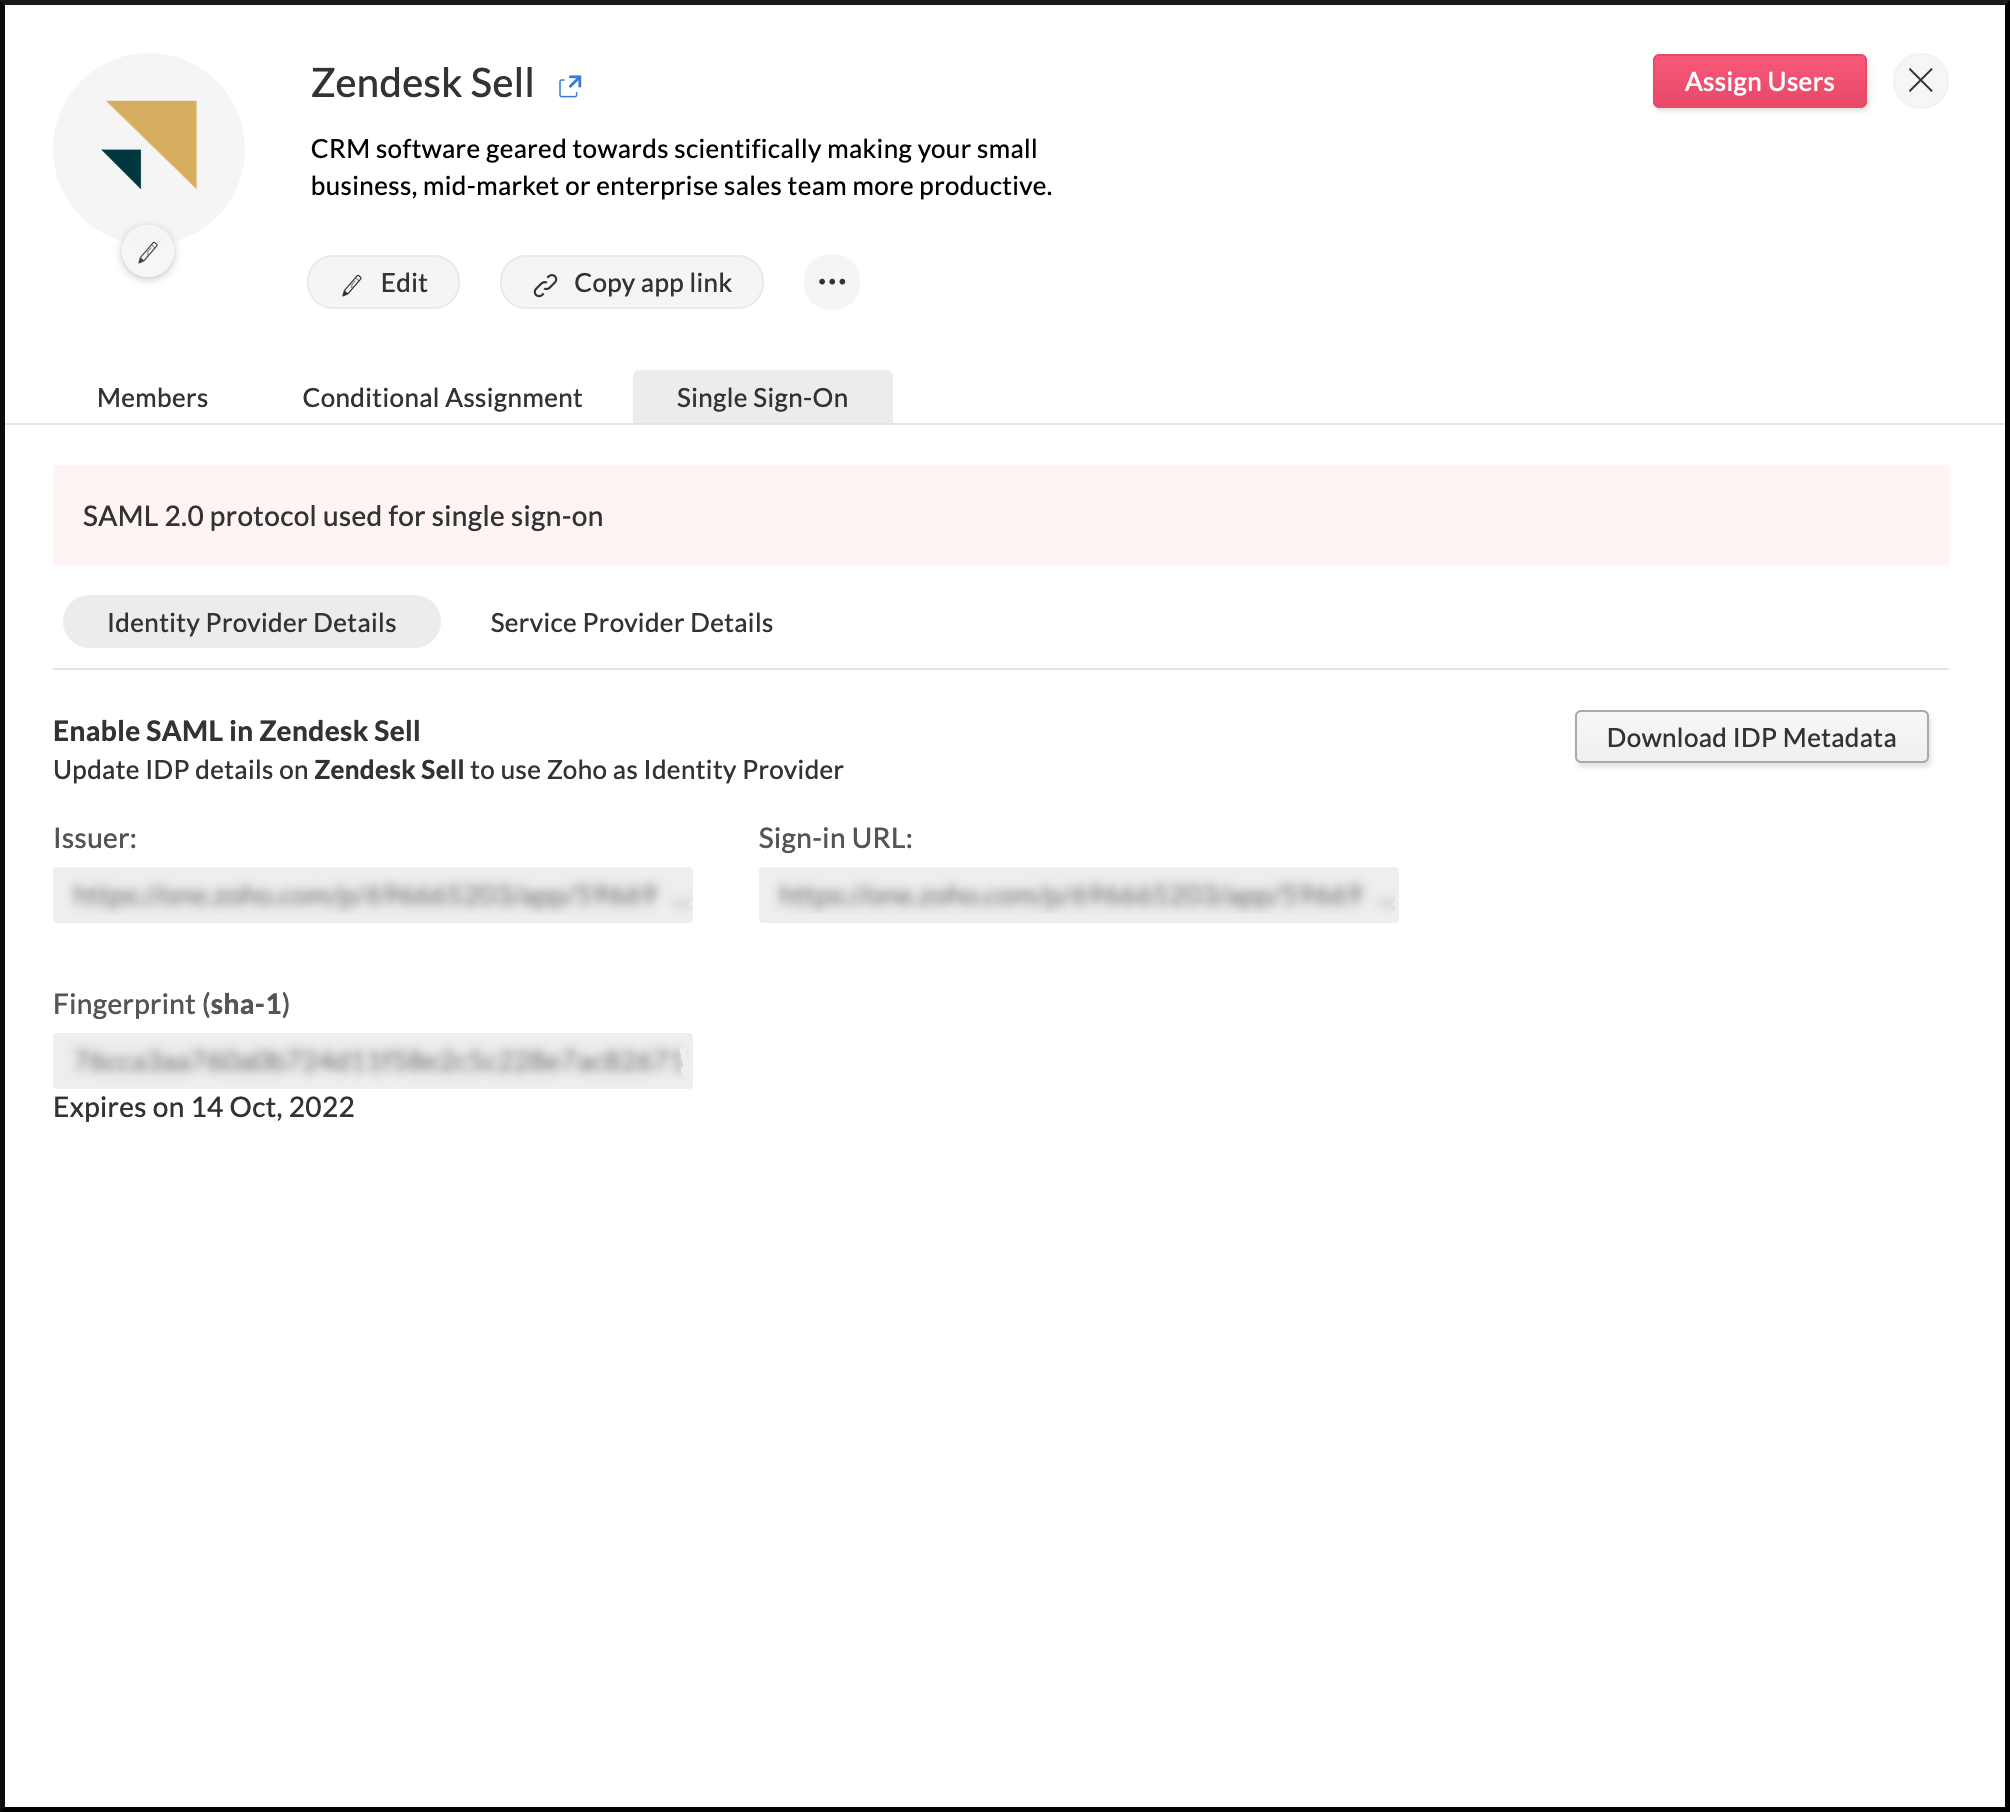 Identity provider details needed to configure SAML in Zendesk Sell